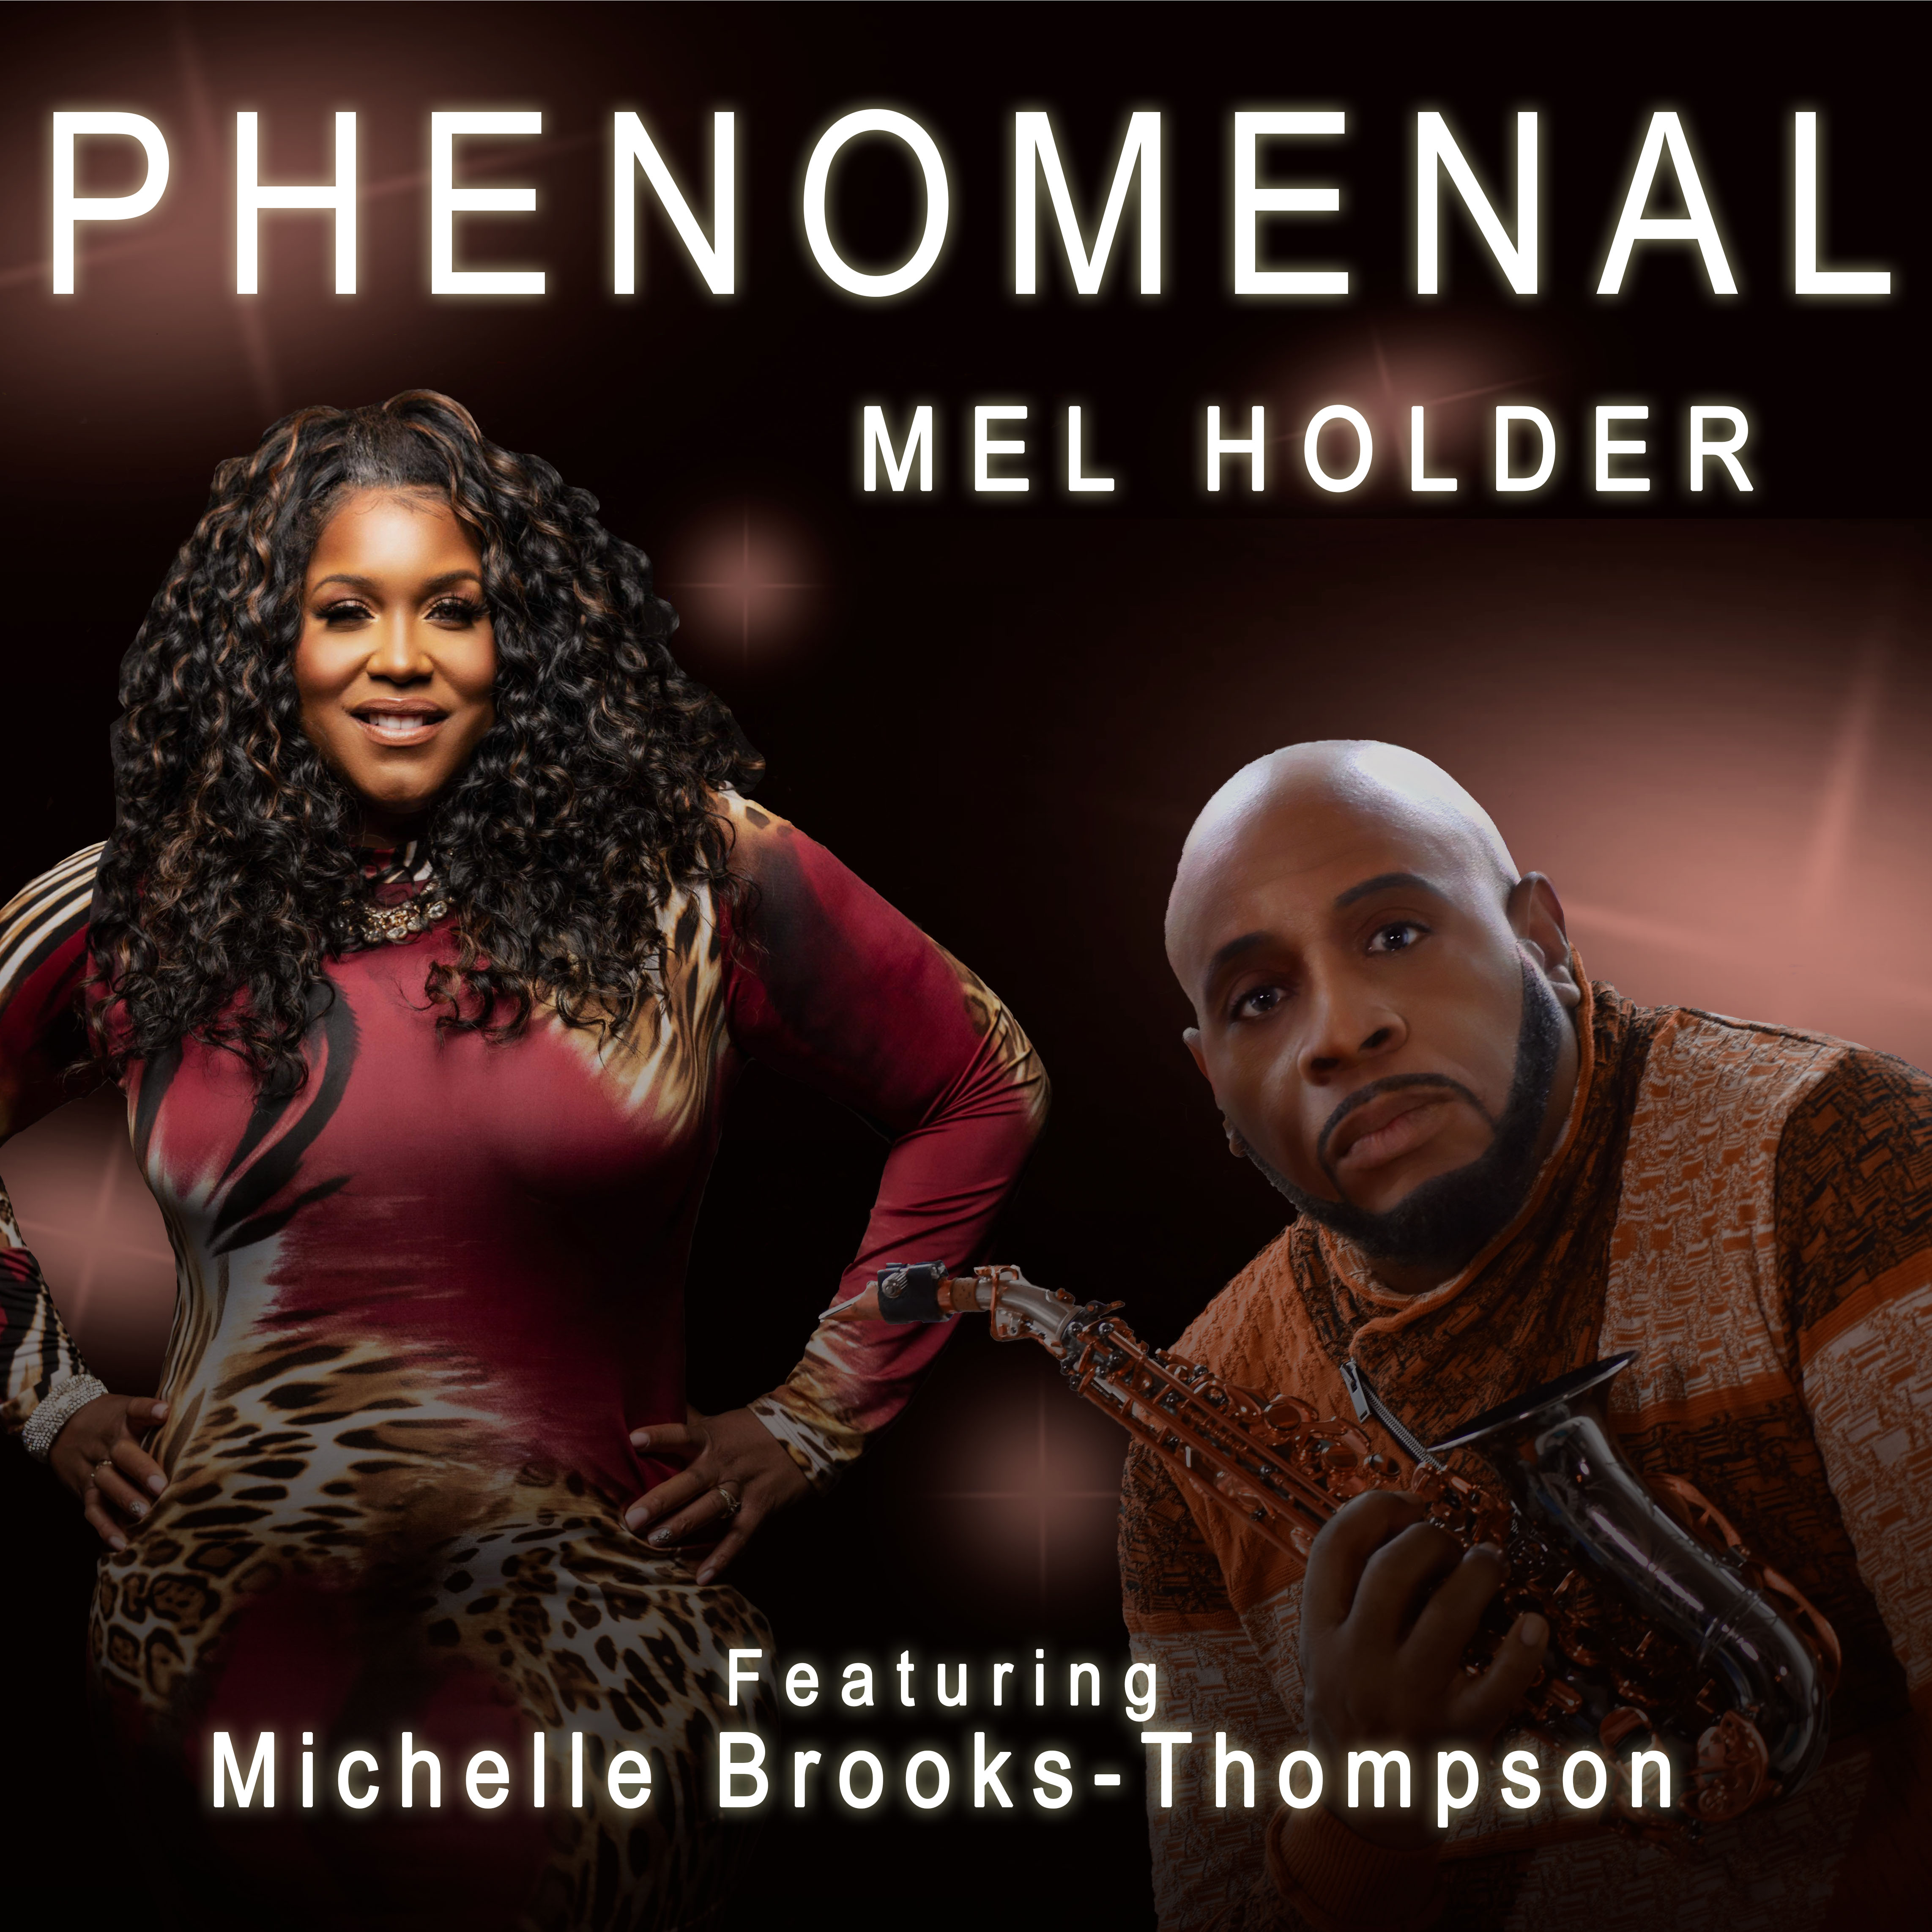 Art for Phenomenal by Mel Holder (featuring Michelle Brooks-Thompson)